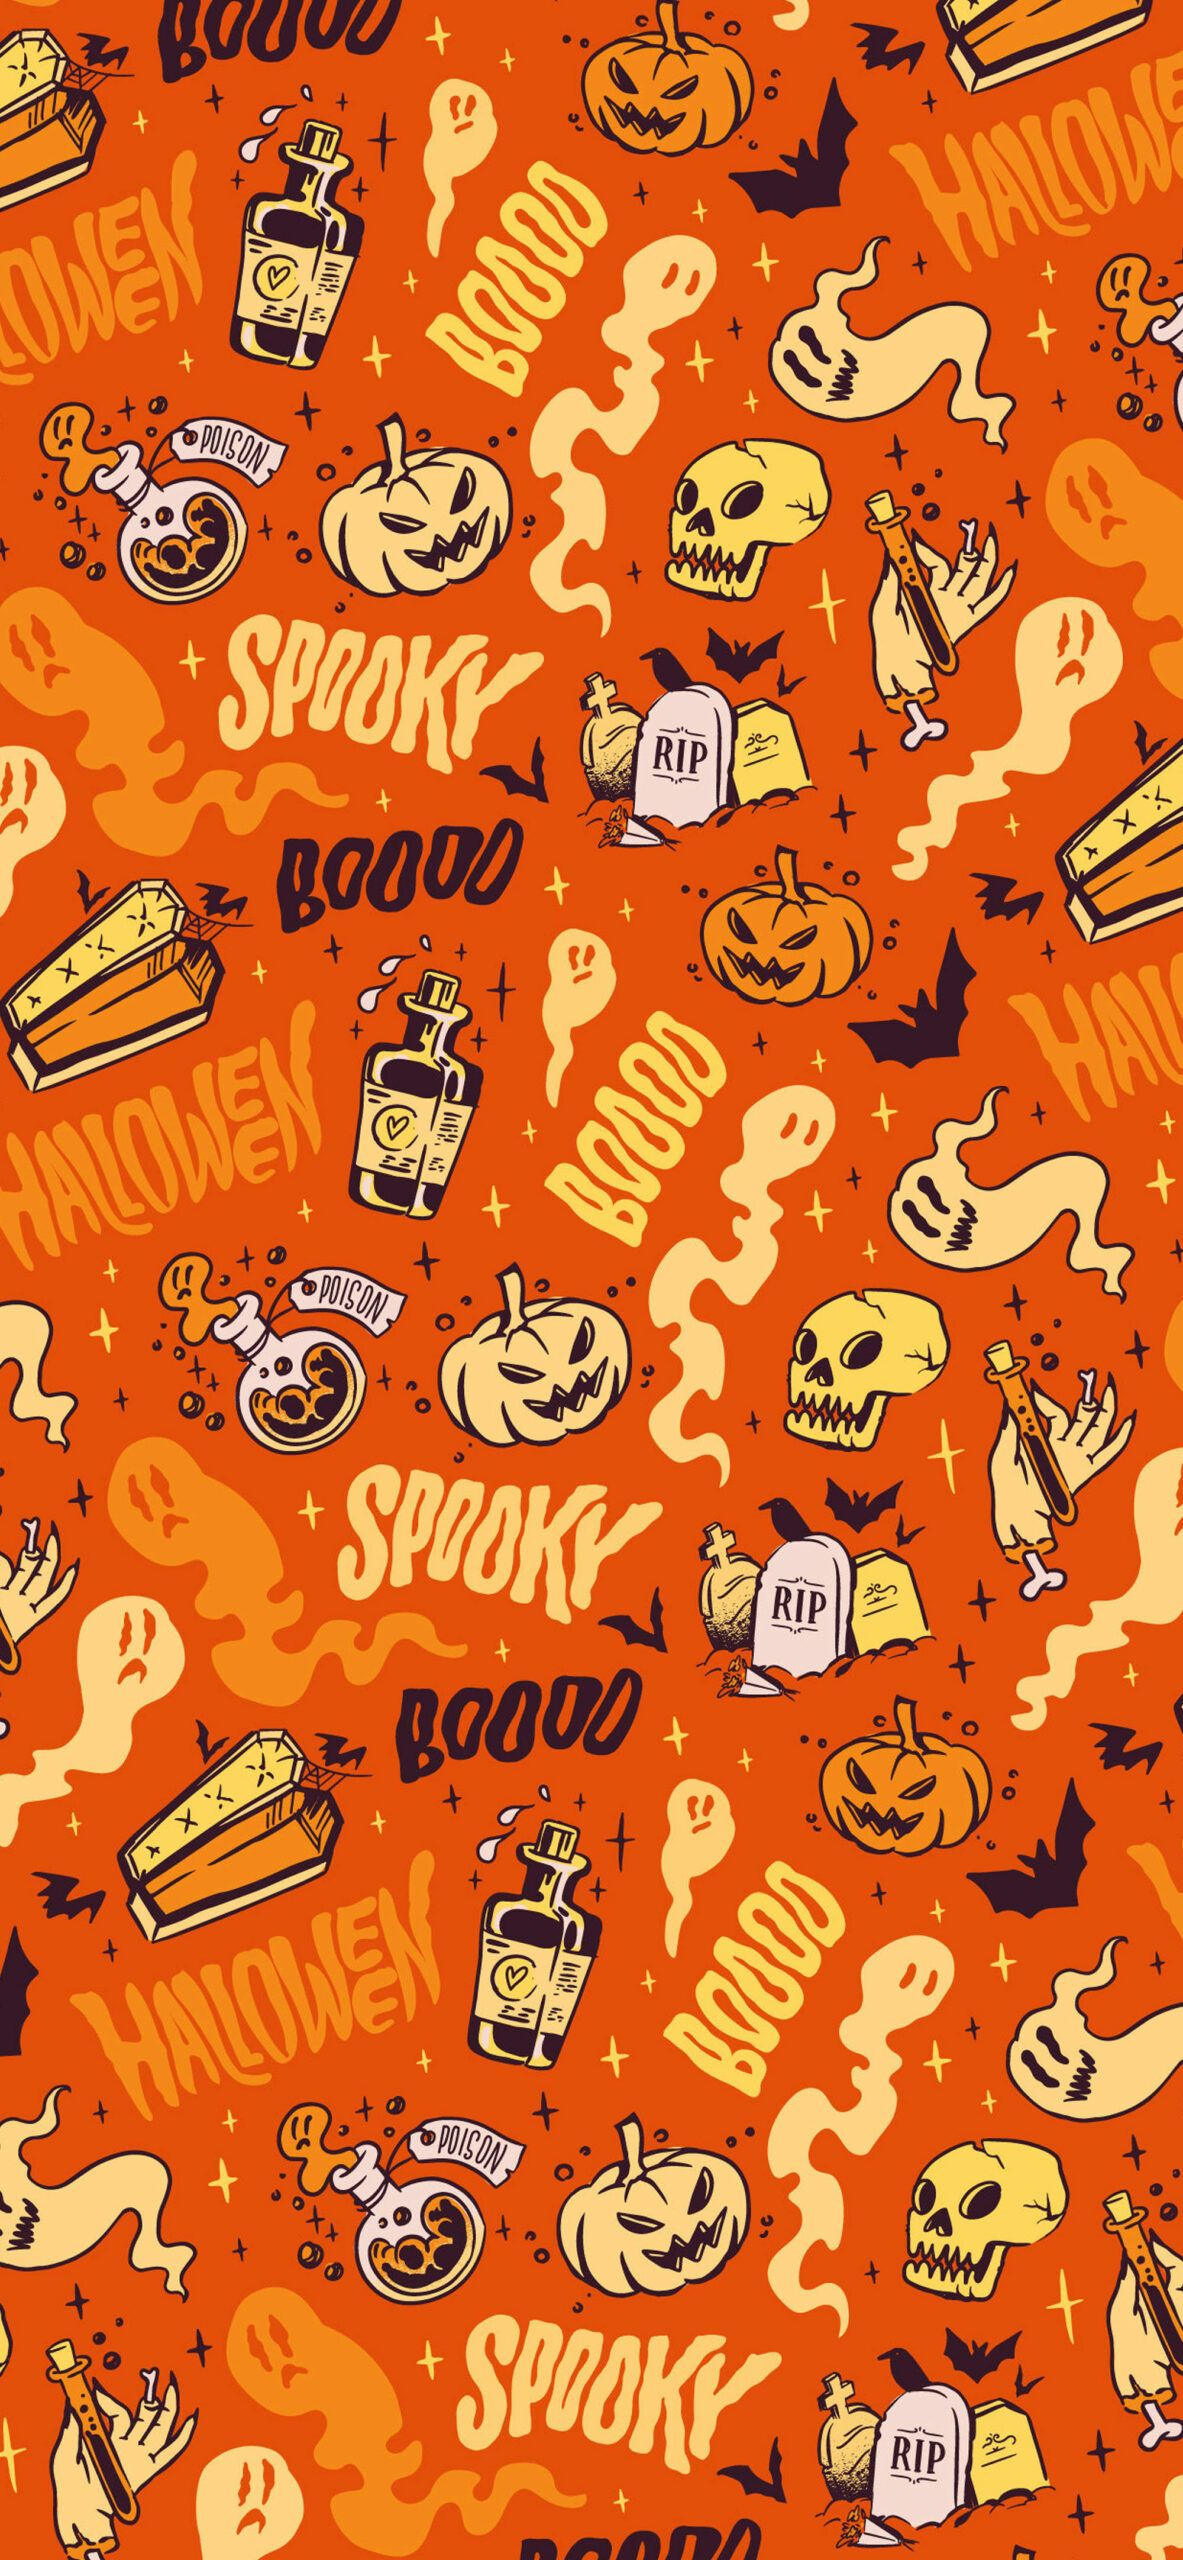 Halloween iPhone wallpaper with pumpkins, ghosts, bats, and coffins. - Blood